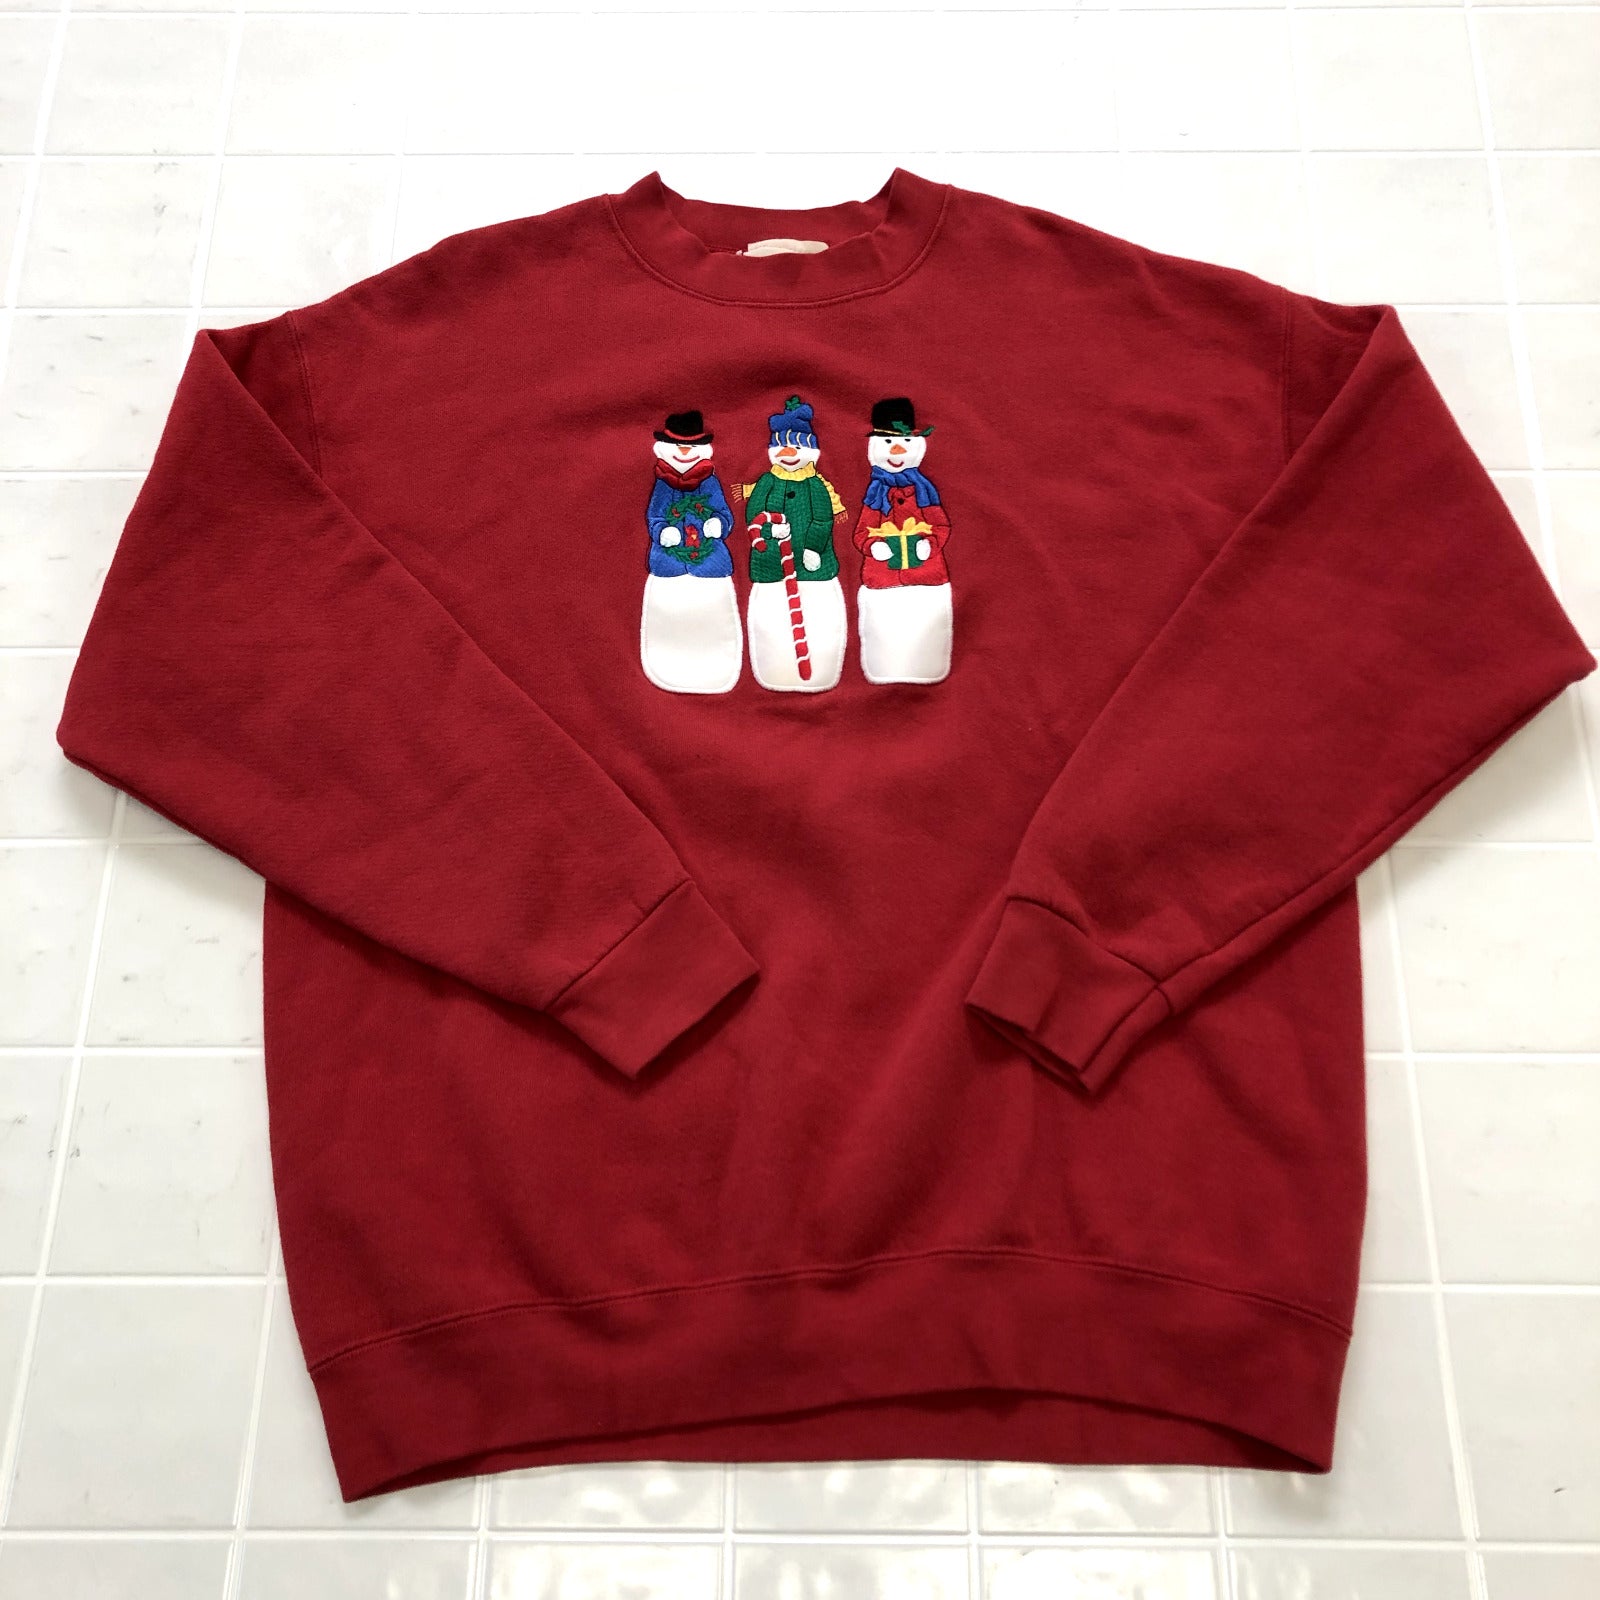 Vintage Peanut Butter & Jelly Red Snowman Christmas Sweatshirt Adult Size L